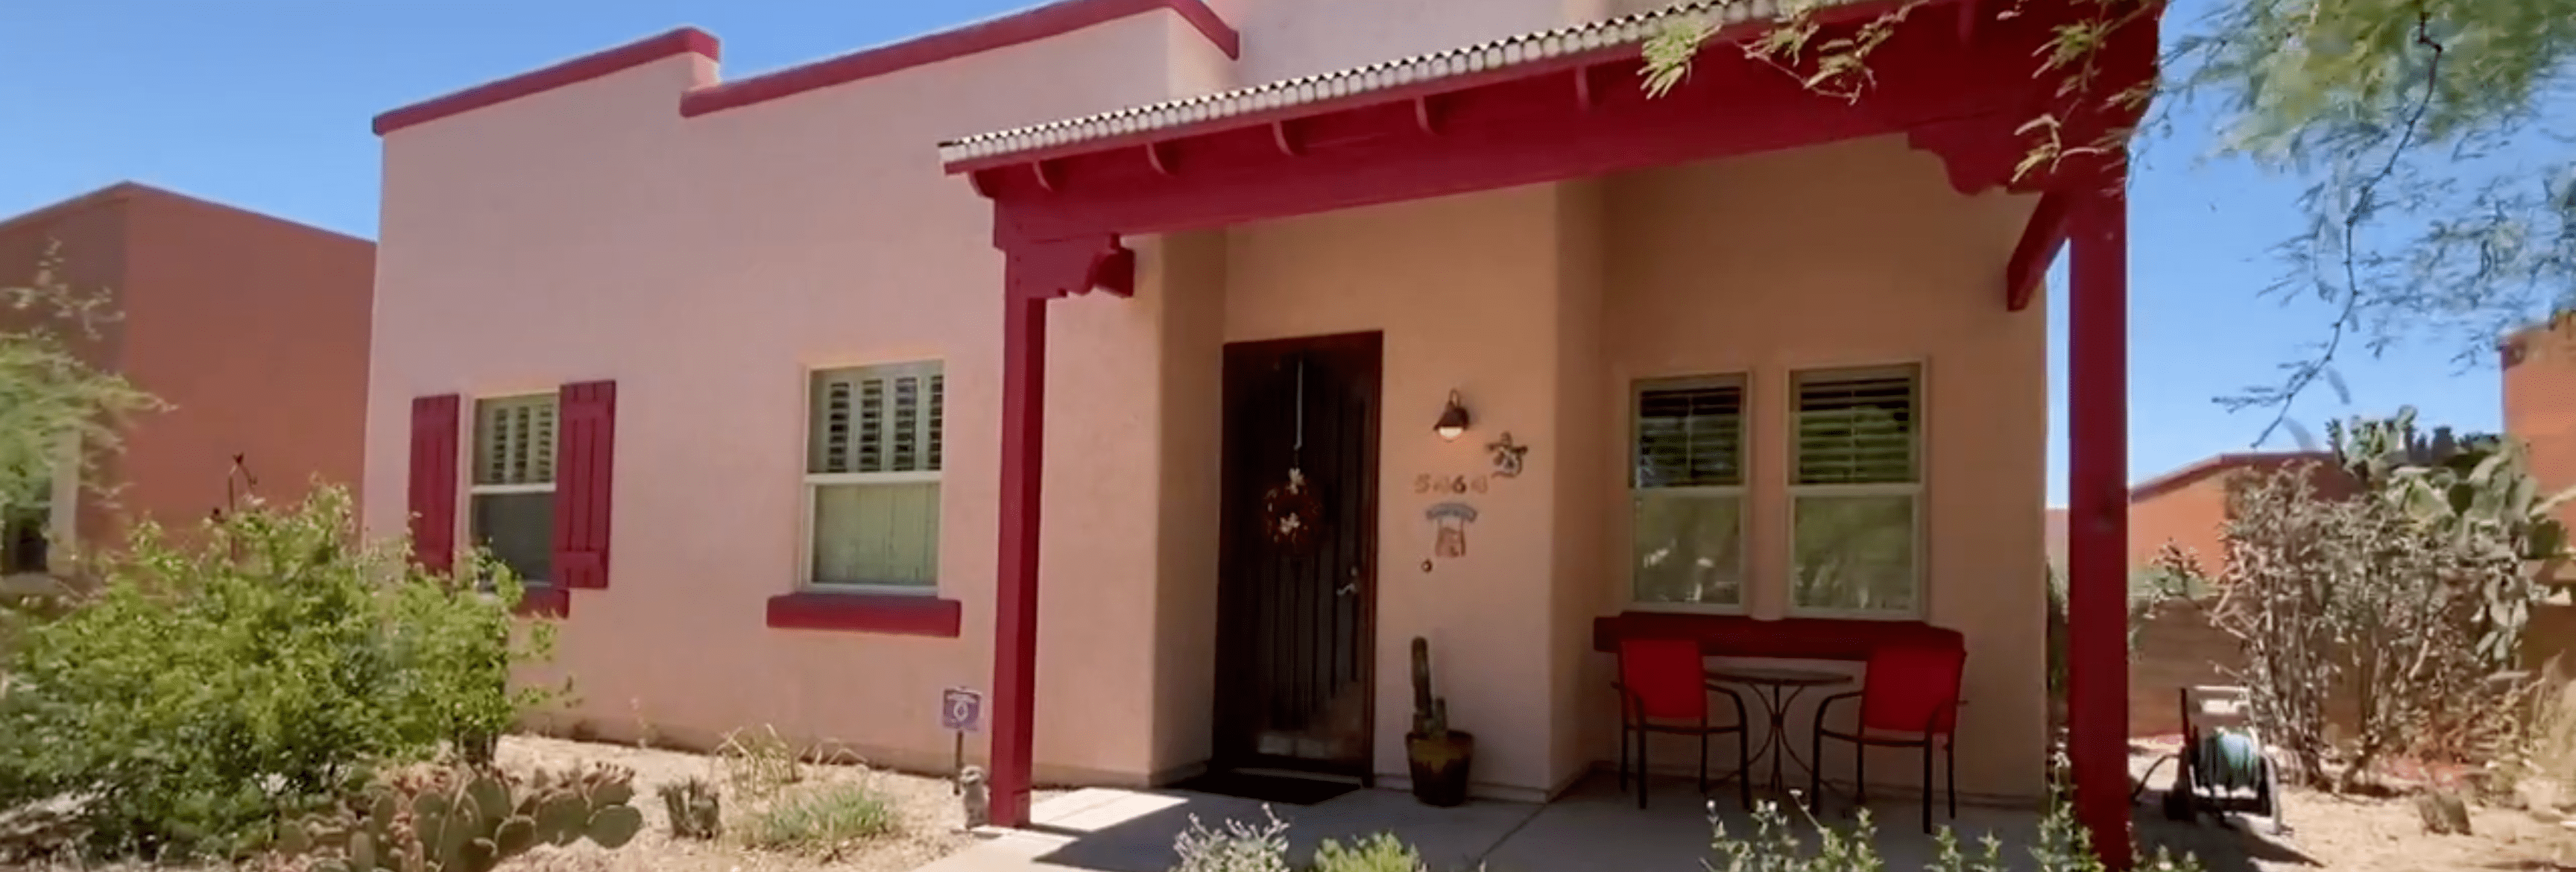 Photo of Civano Home - pink house with red trim and a covered porch with a table and two chairs under it -in Tucson's Masterplanned Community for Sustainability